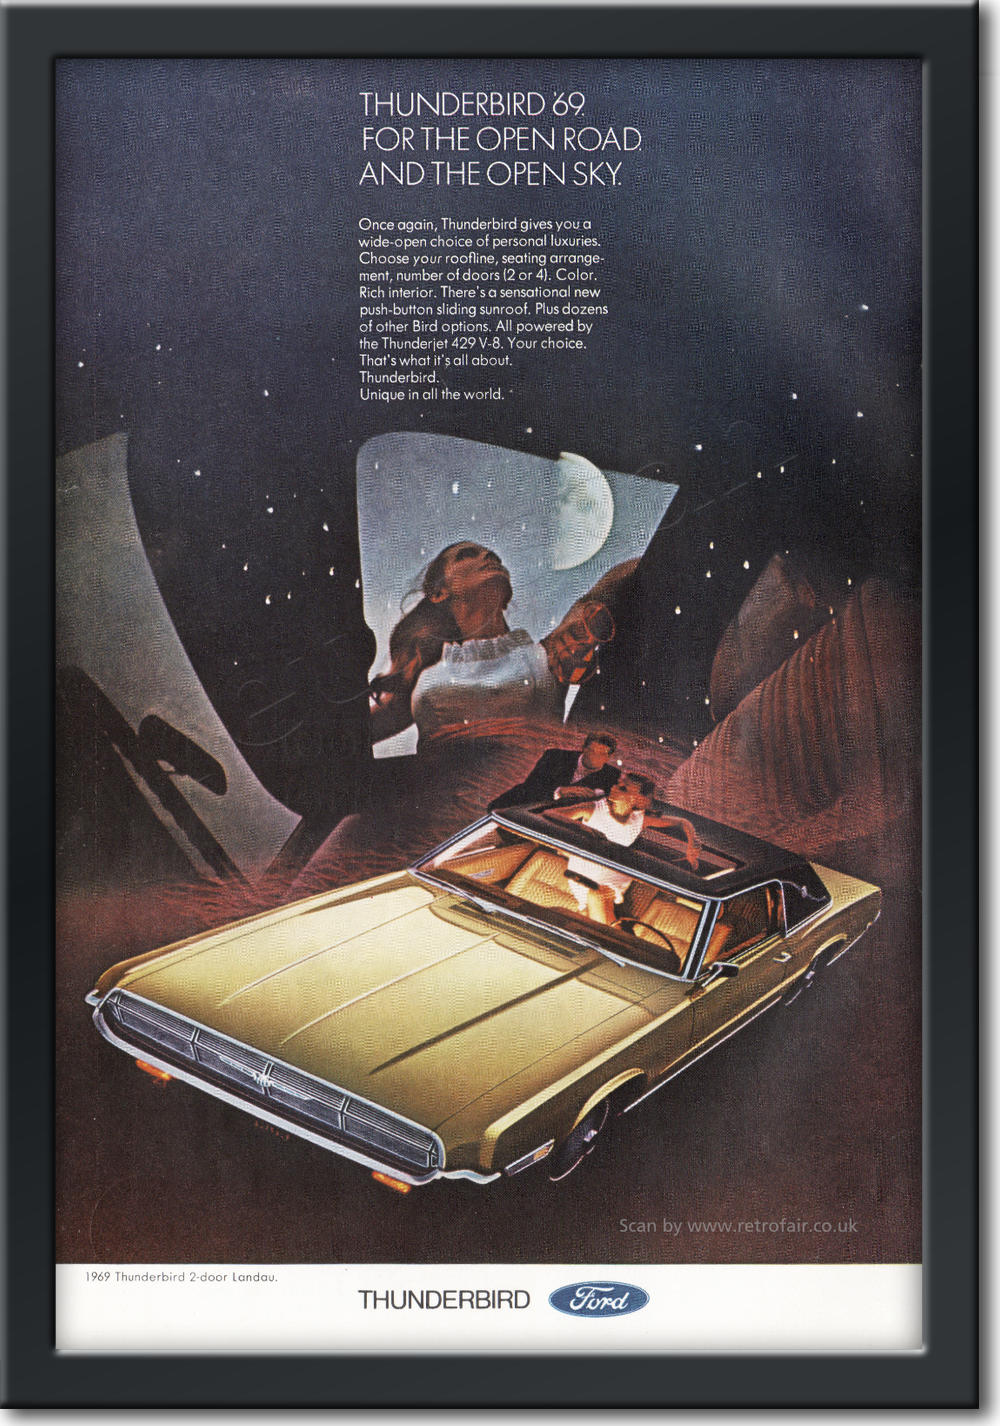 1969 Ford Thunderbird - framed preview vintage ad